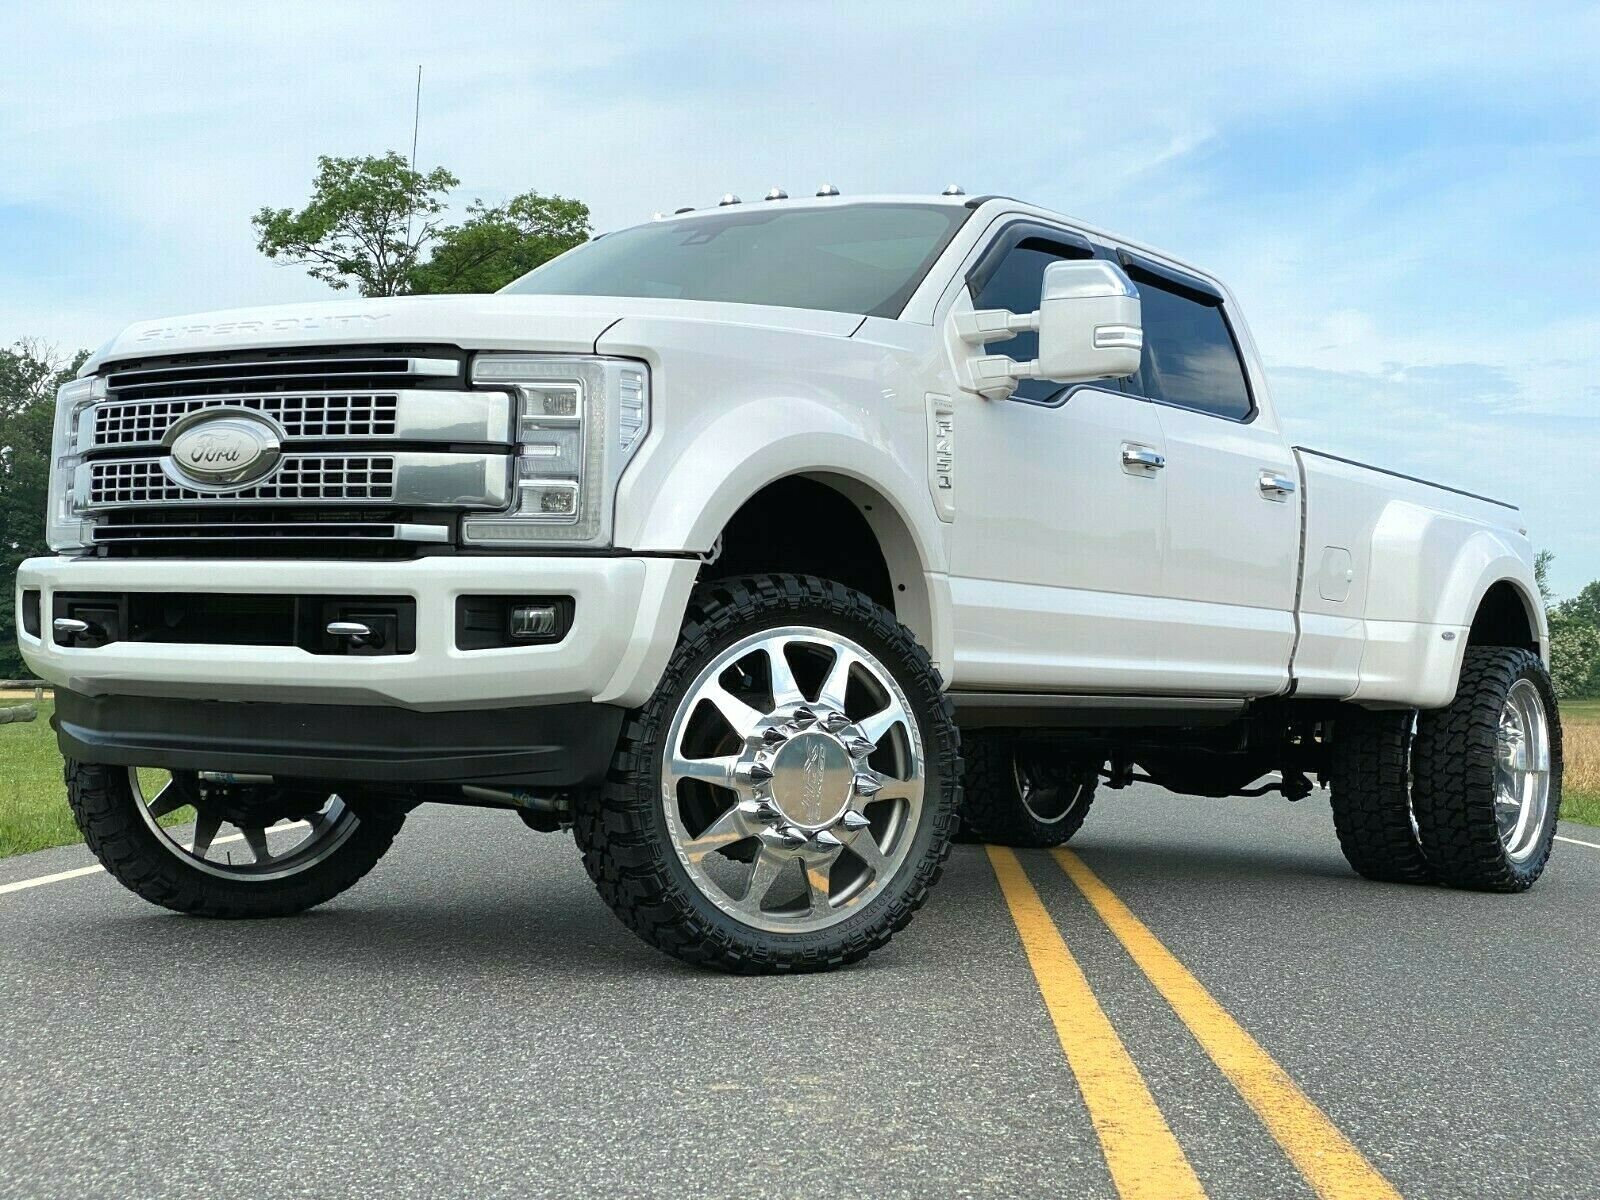 2017 Ford F-450 Platinum Lifted Drw Must See 2017 Ford F450 Drw 6.7l Diesel 4x4 Platinum On 26" Jtx Killer Look Must See Wow